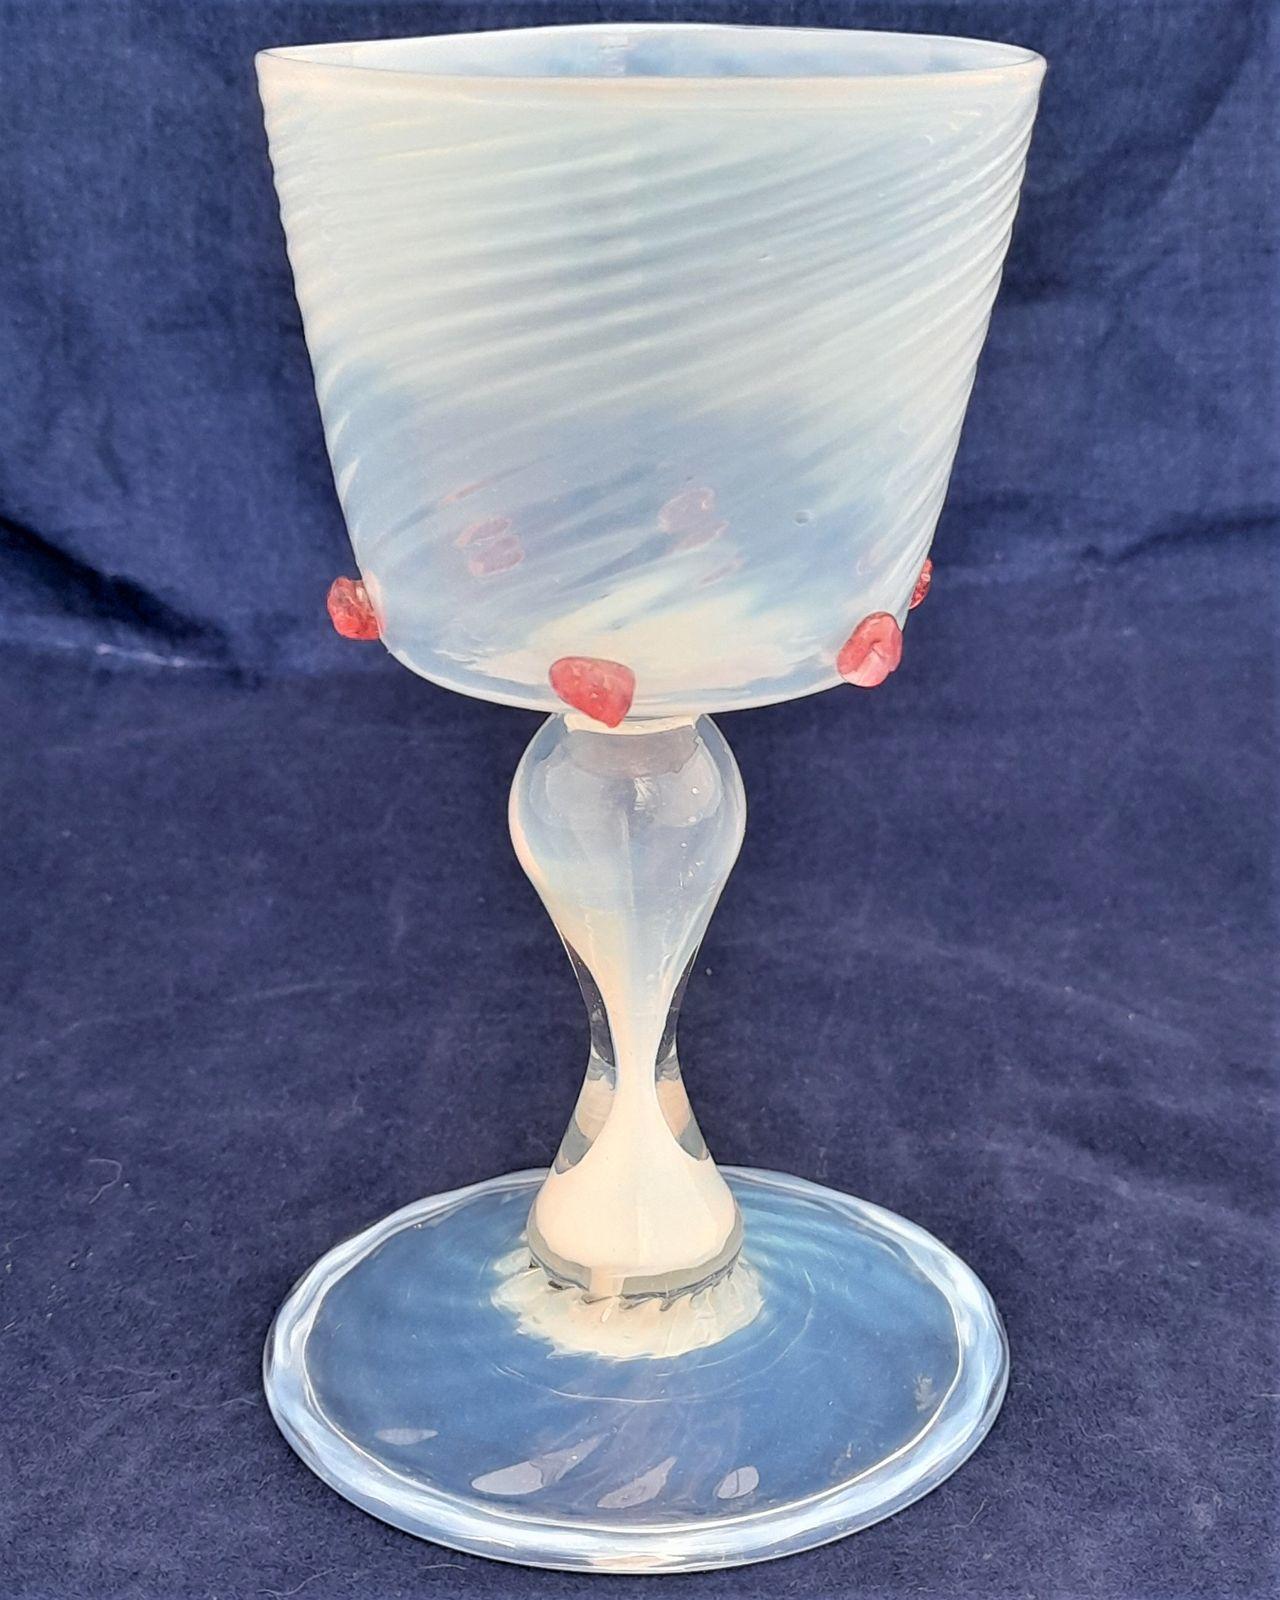 Antique Antonio Salviati & Co Façon de Venise Wrythen Fluted Opal Wine Glass circa 1880.  The wrythen fluted bucket shaped bowl with six applied red prunts, all on a hollow hour glass opal stem, on a wrythen fluted folded foot with a rough pontil. Some typical minor surface wear.